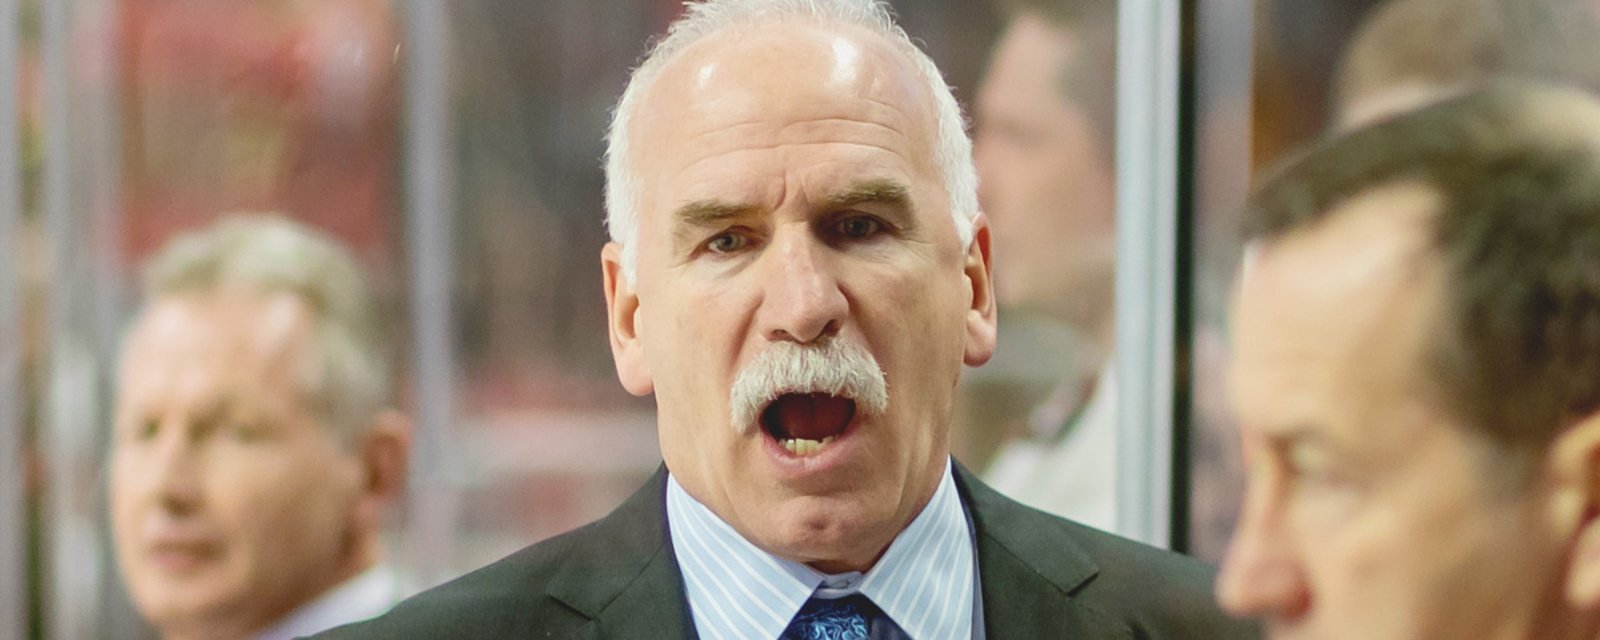 BREAKING: Joel Quenneville benching a key player in the 2nd period.